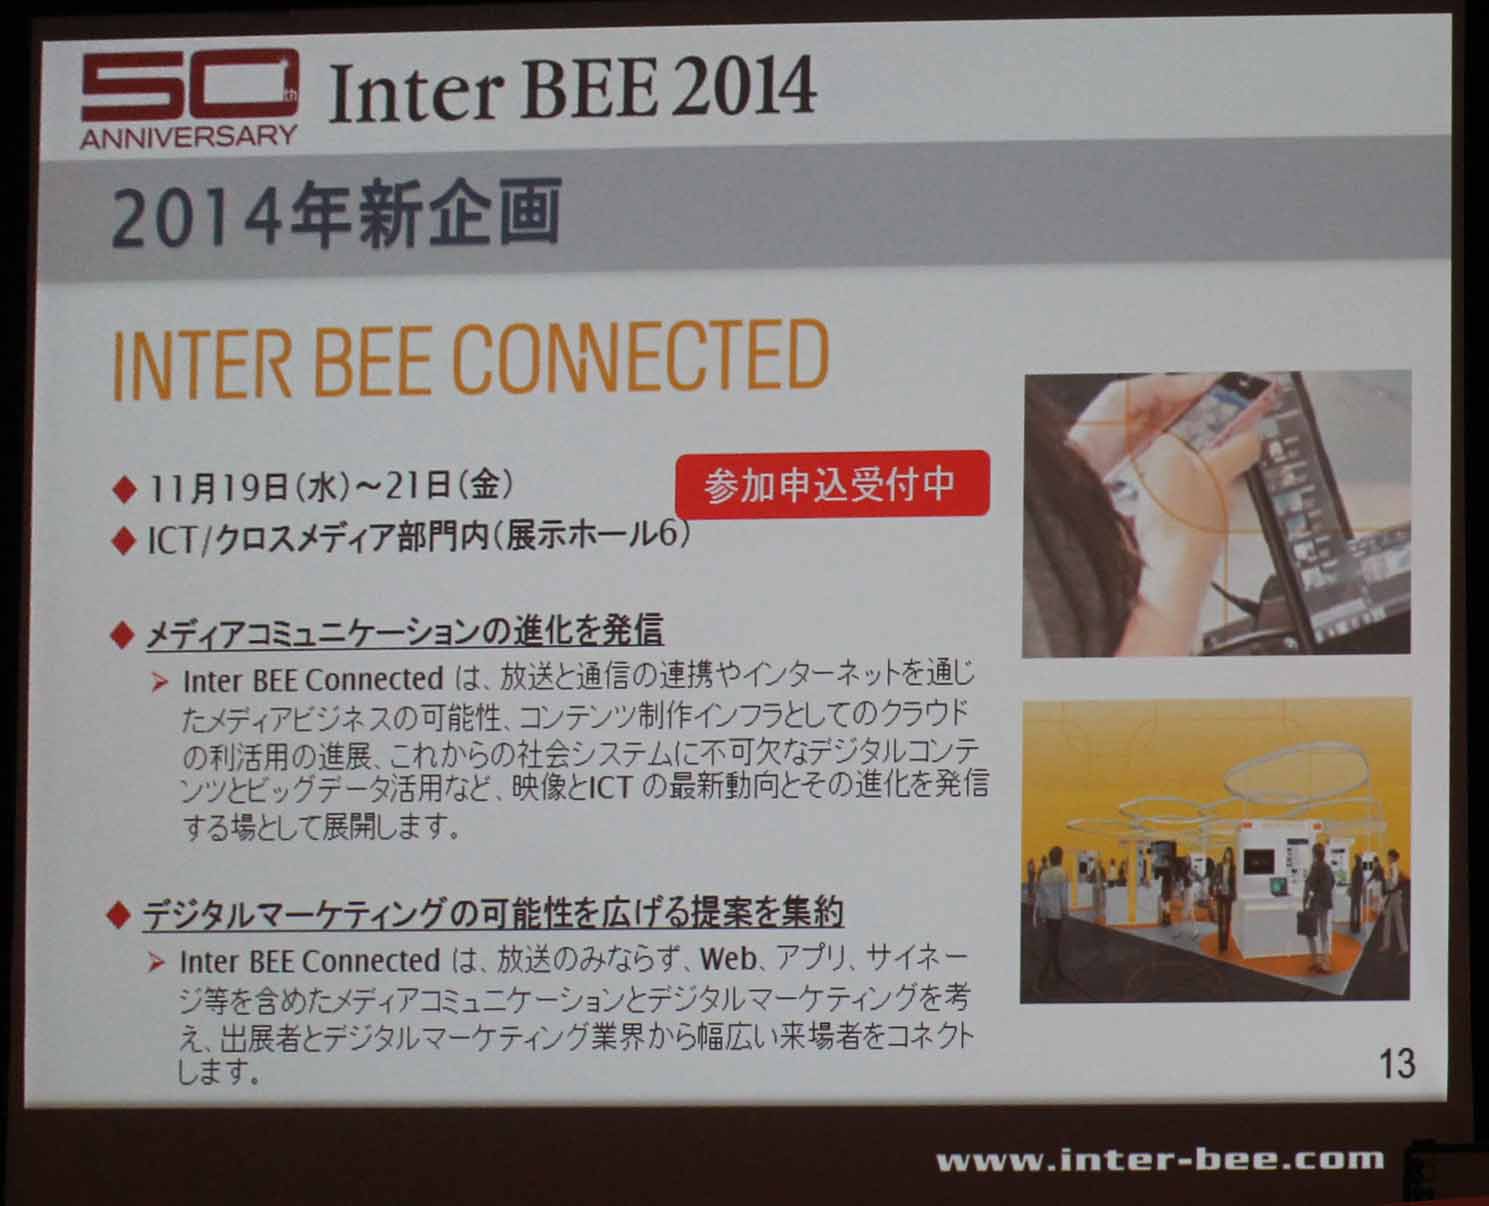 Description for INTER BEE CONNECTED, a new event.